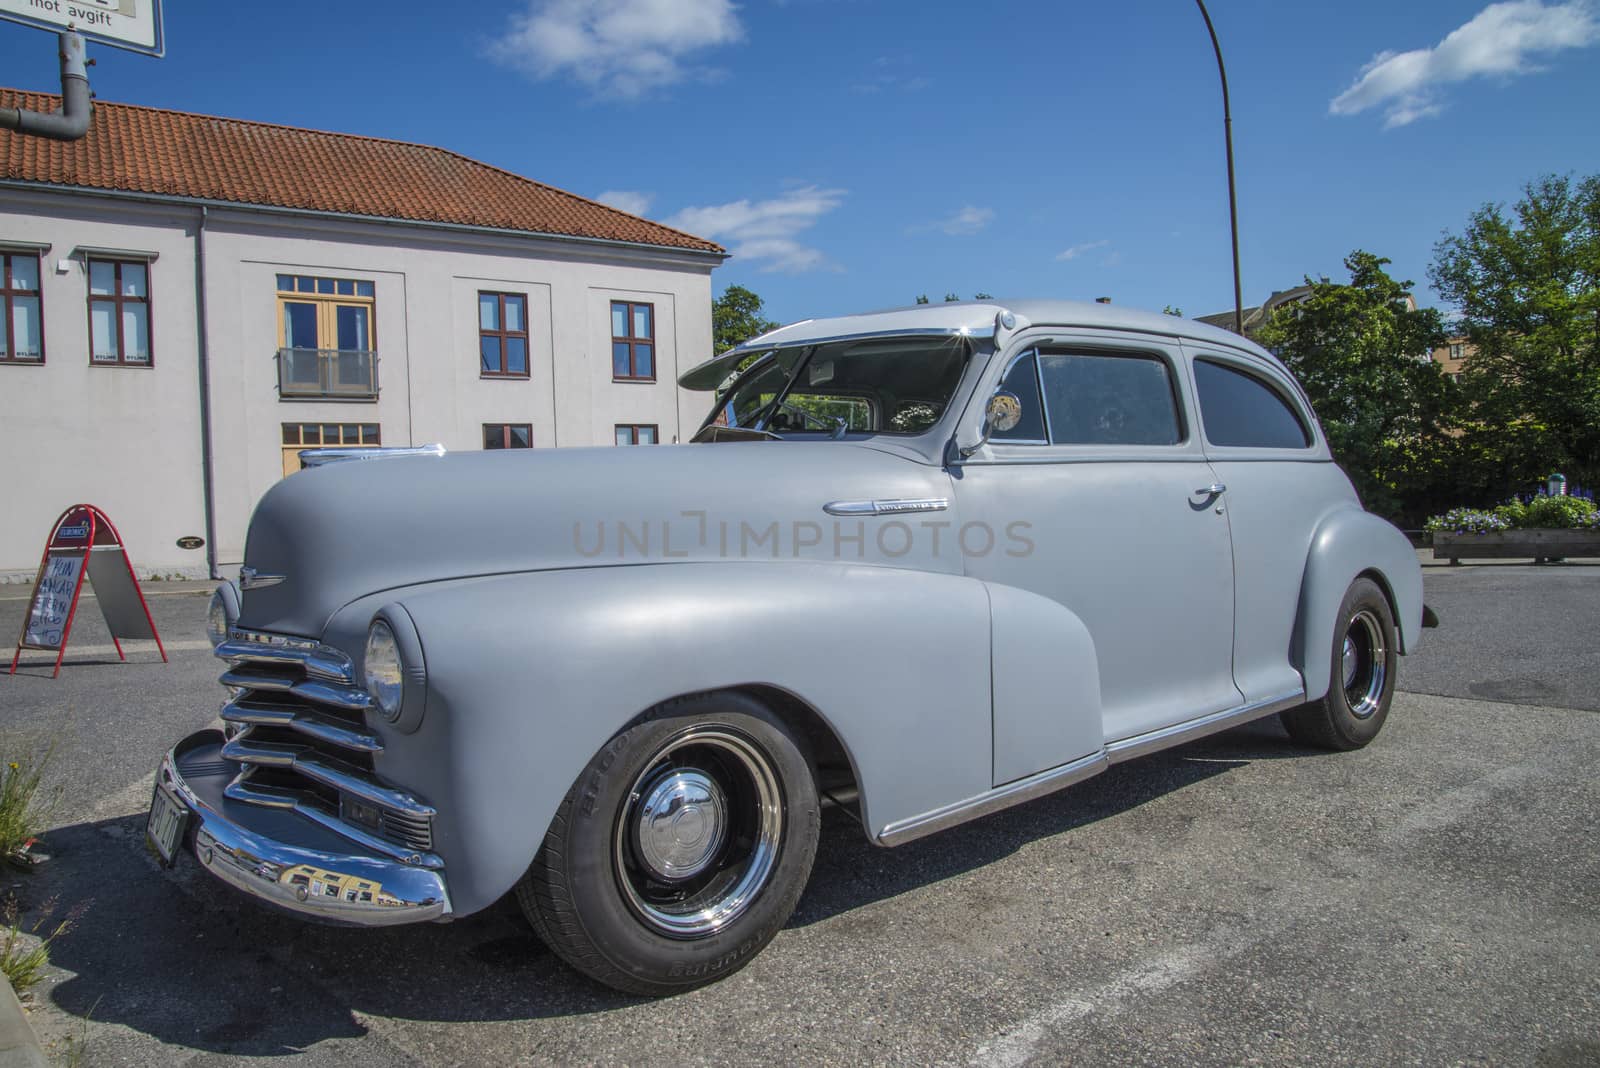 classic american cars, 1948 chevrolet stylemaster by steirus